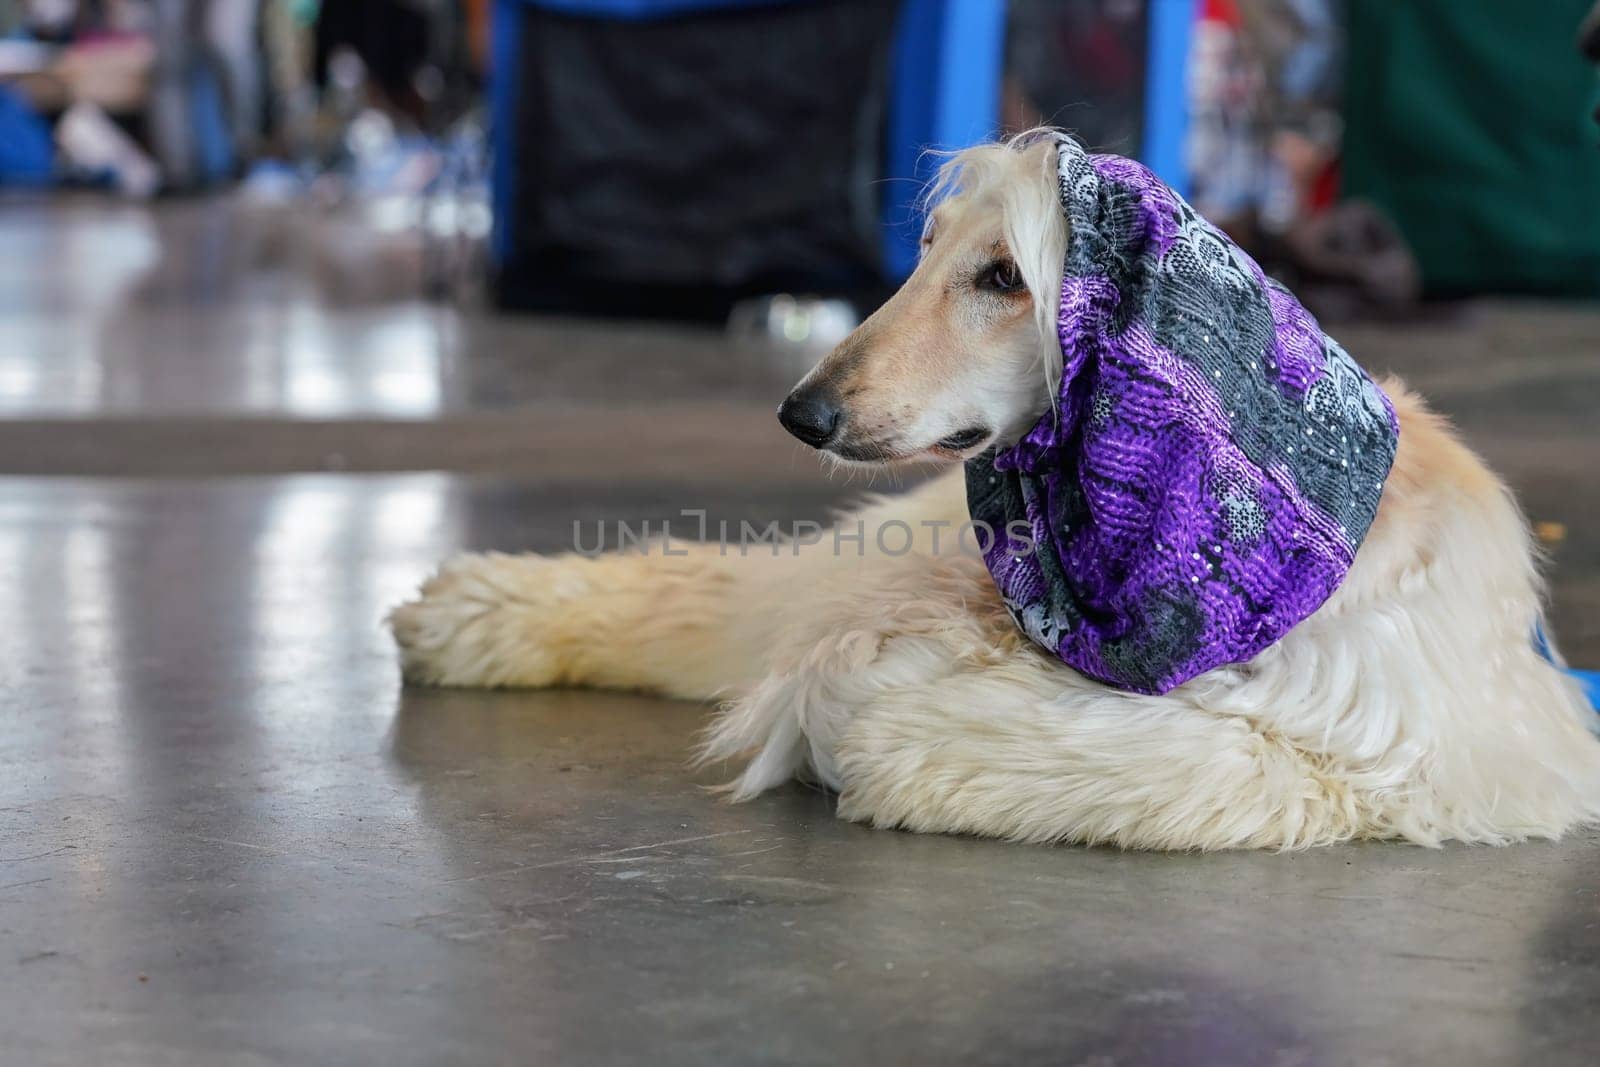 Russian borzoi laying on the stone floor indoor hall, violet scarf covering head, during dog show contest